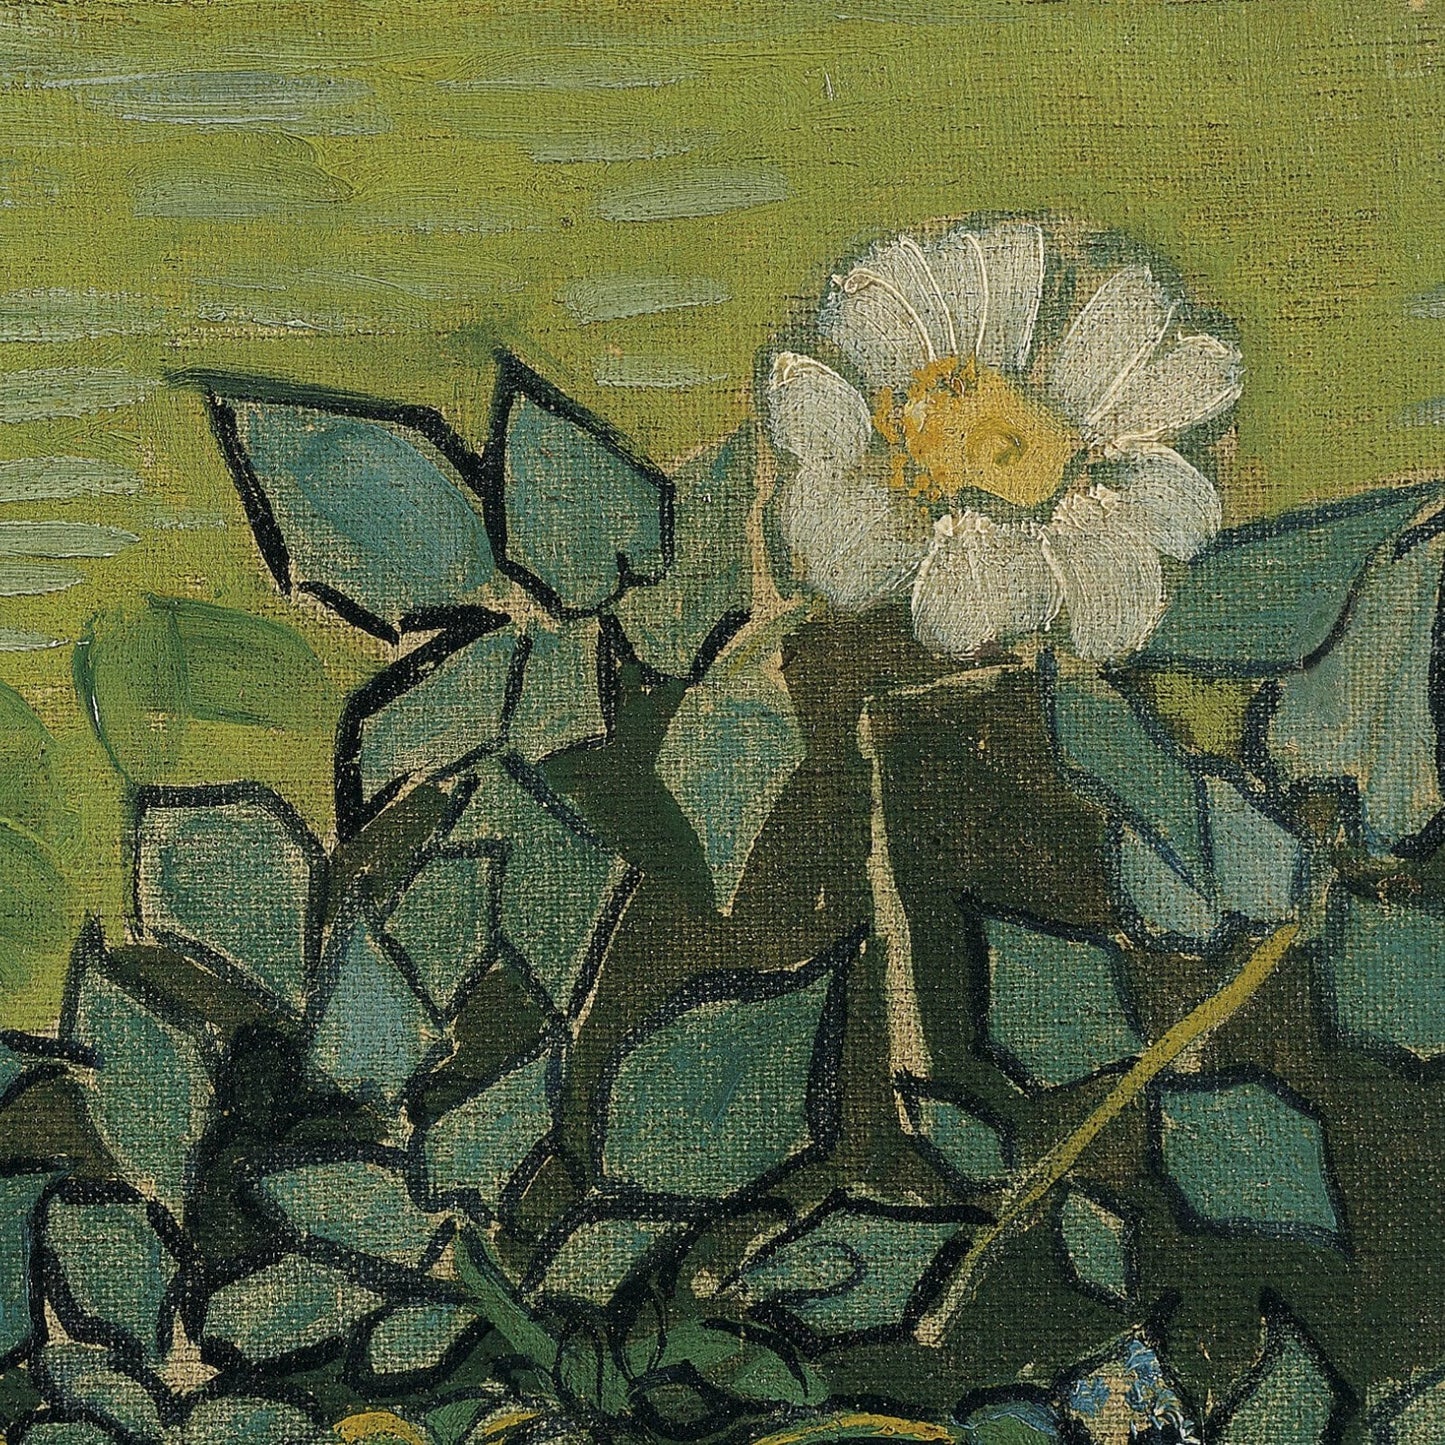 Wild Roses by Vincent Van Gogh, 3d Printed with texture and brush strokes looks like original oil-painting, code:331